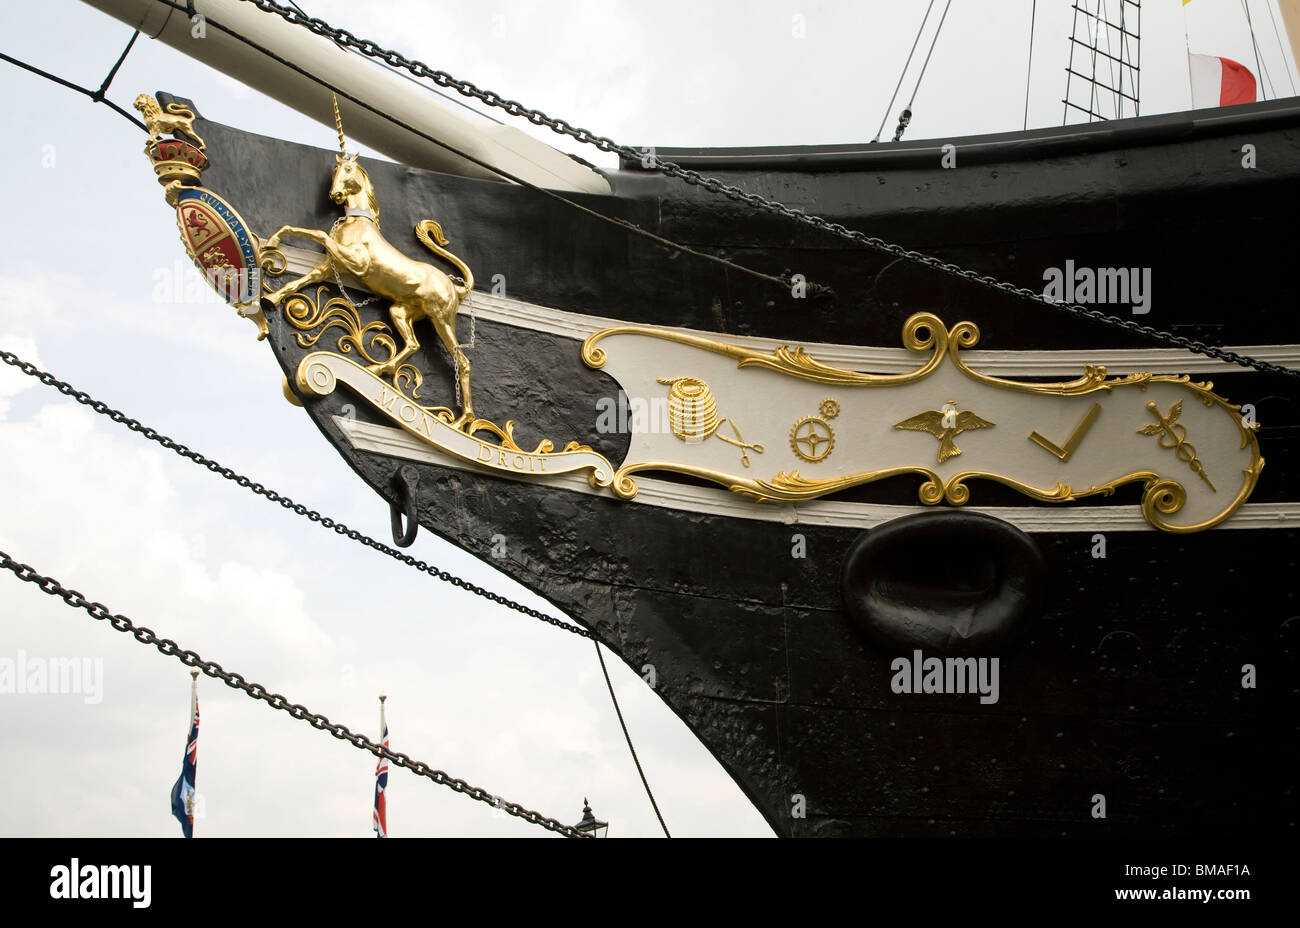 Decorated ship bow, SS Great Britain maritime museum, Bristol, England Stock Photo